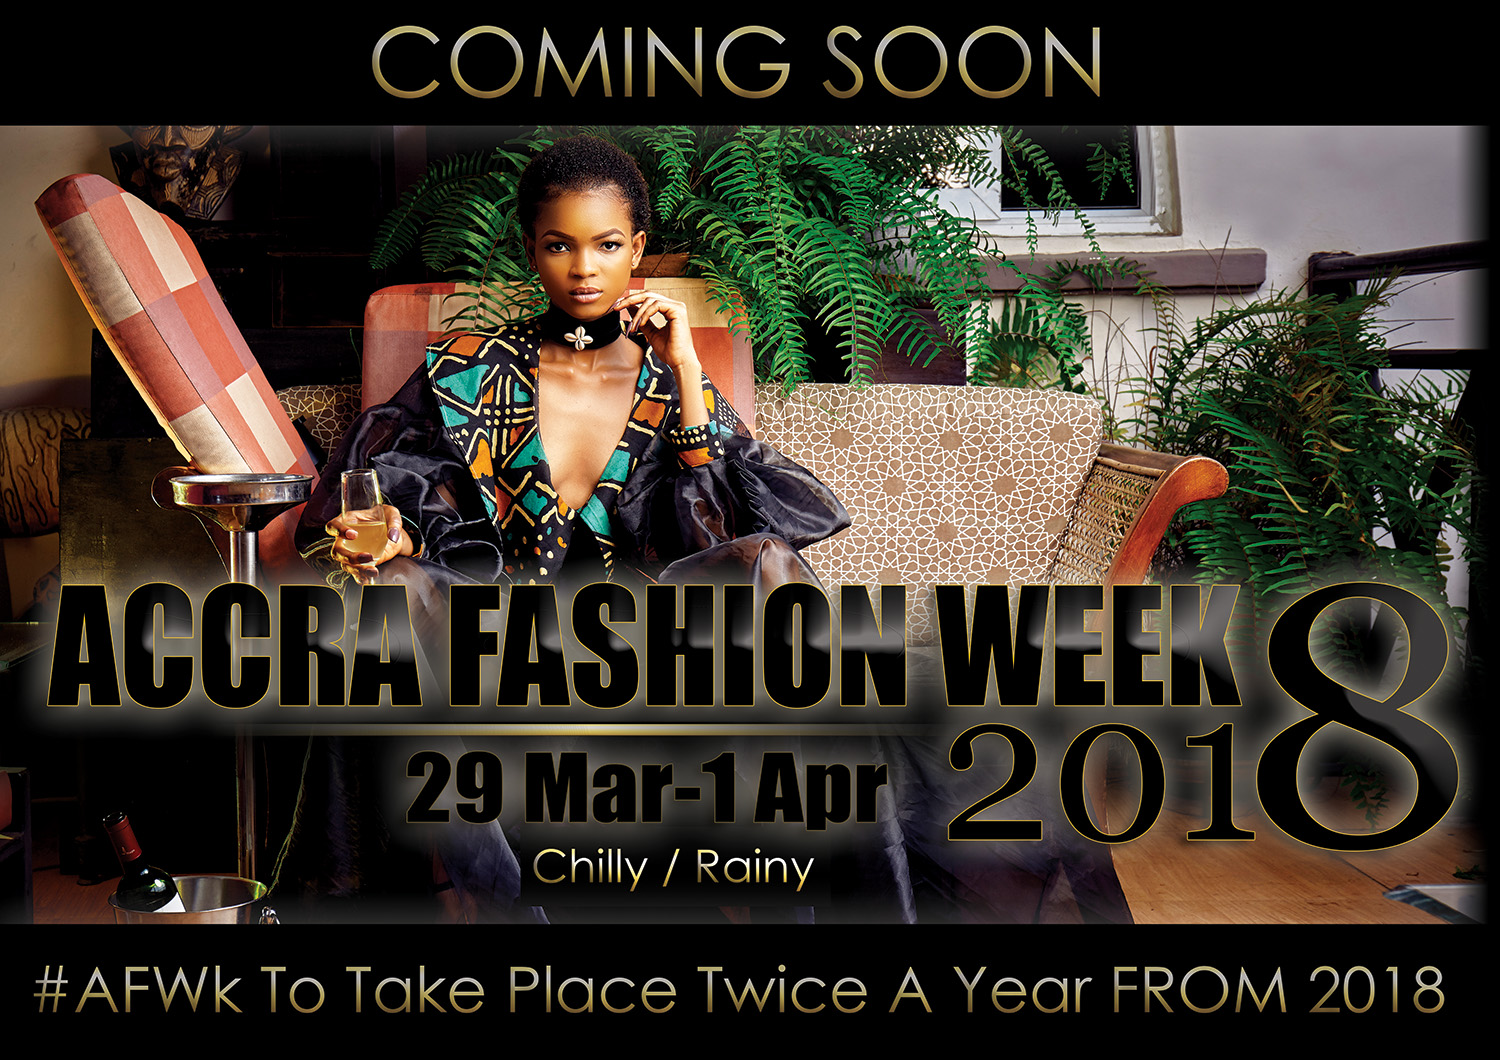 Accra Fashion Week Set To Take Place Twice A Year In 2018